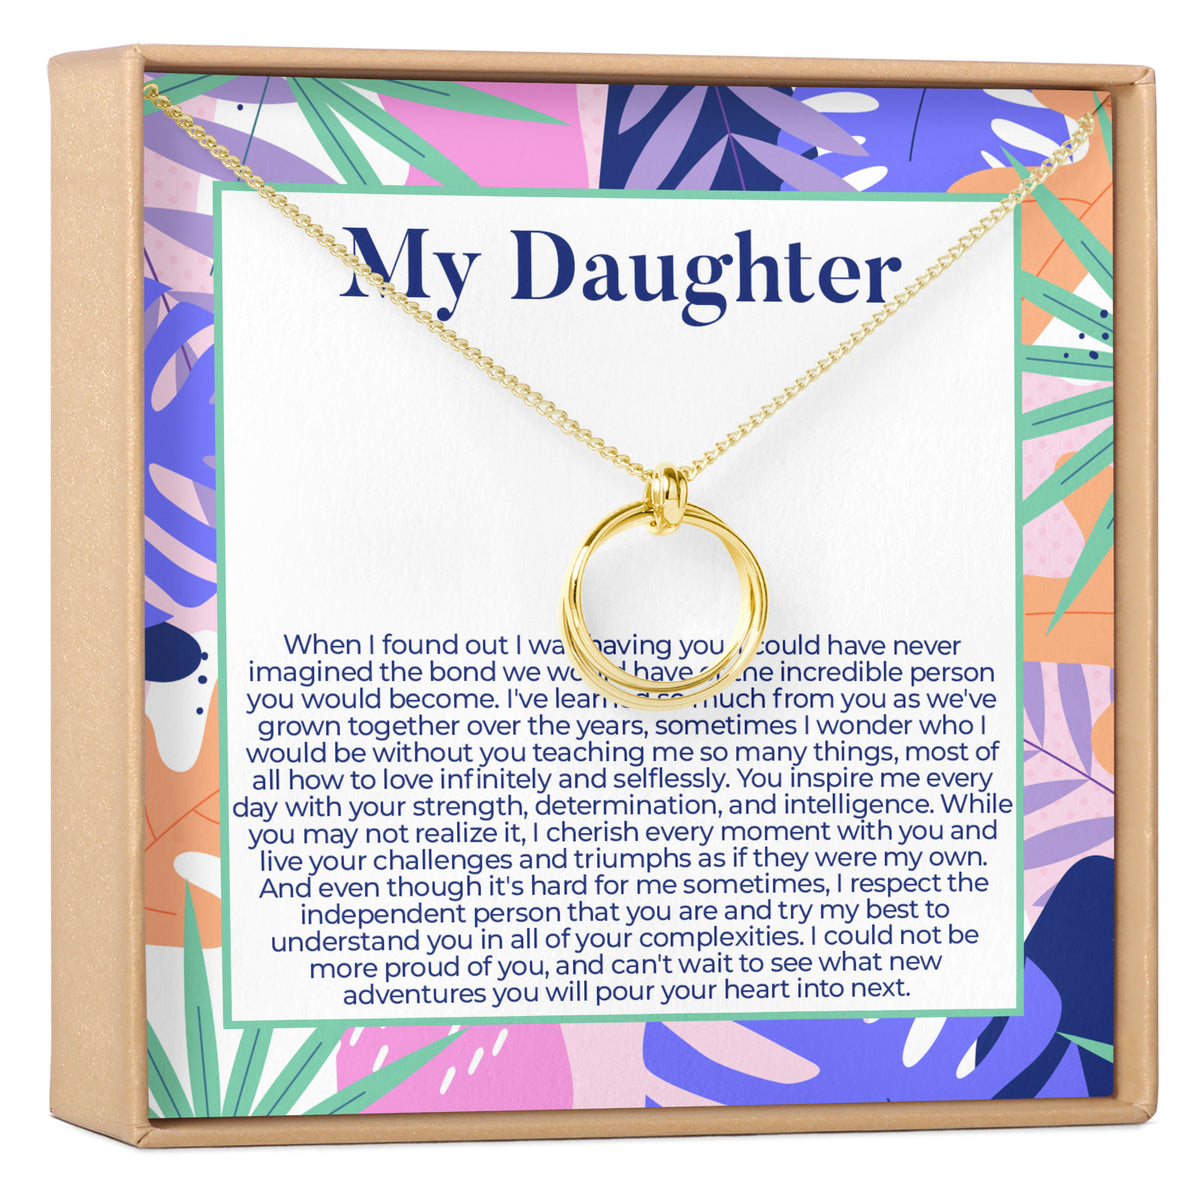 Father &amp; Daughter Necklace, Multiple Styles Necklace